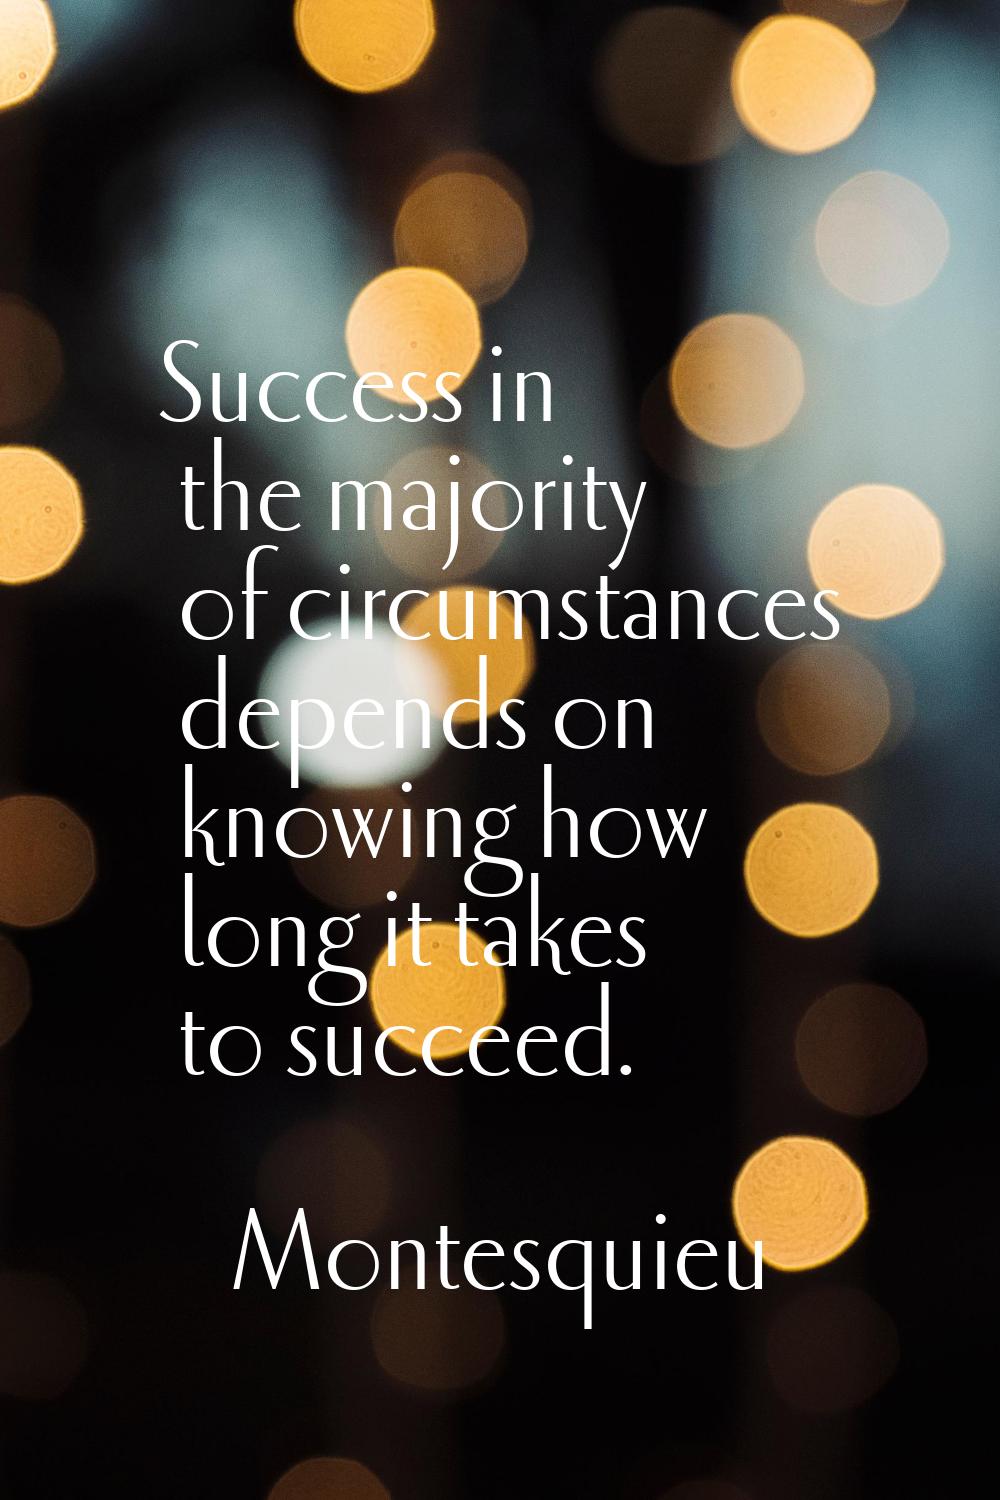 Success in the majority of circumstances depends on knowing how long it takes to succeed.